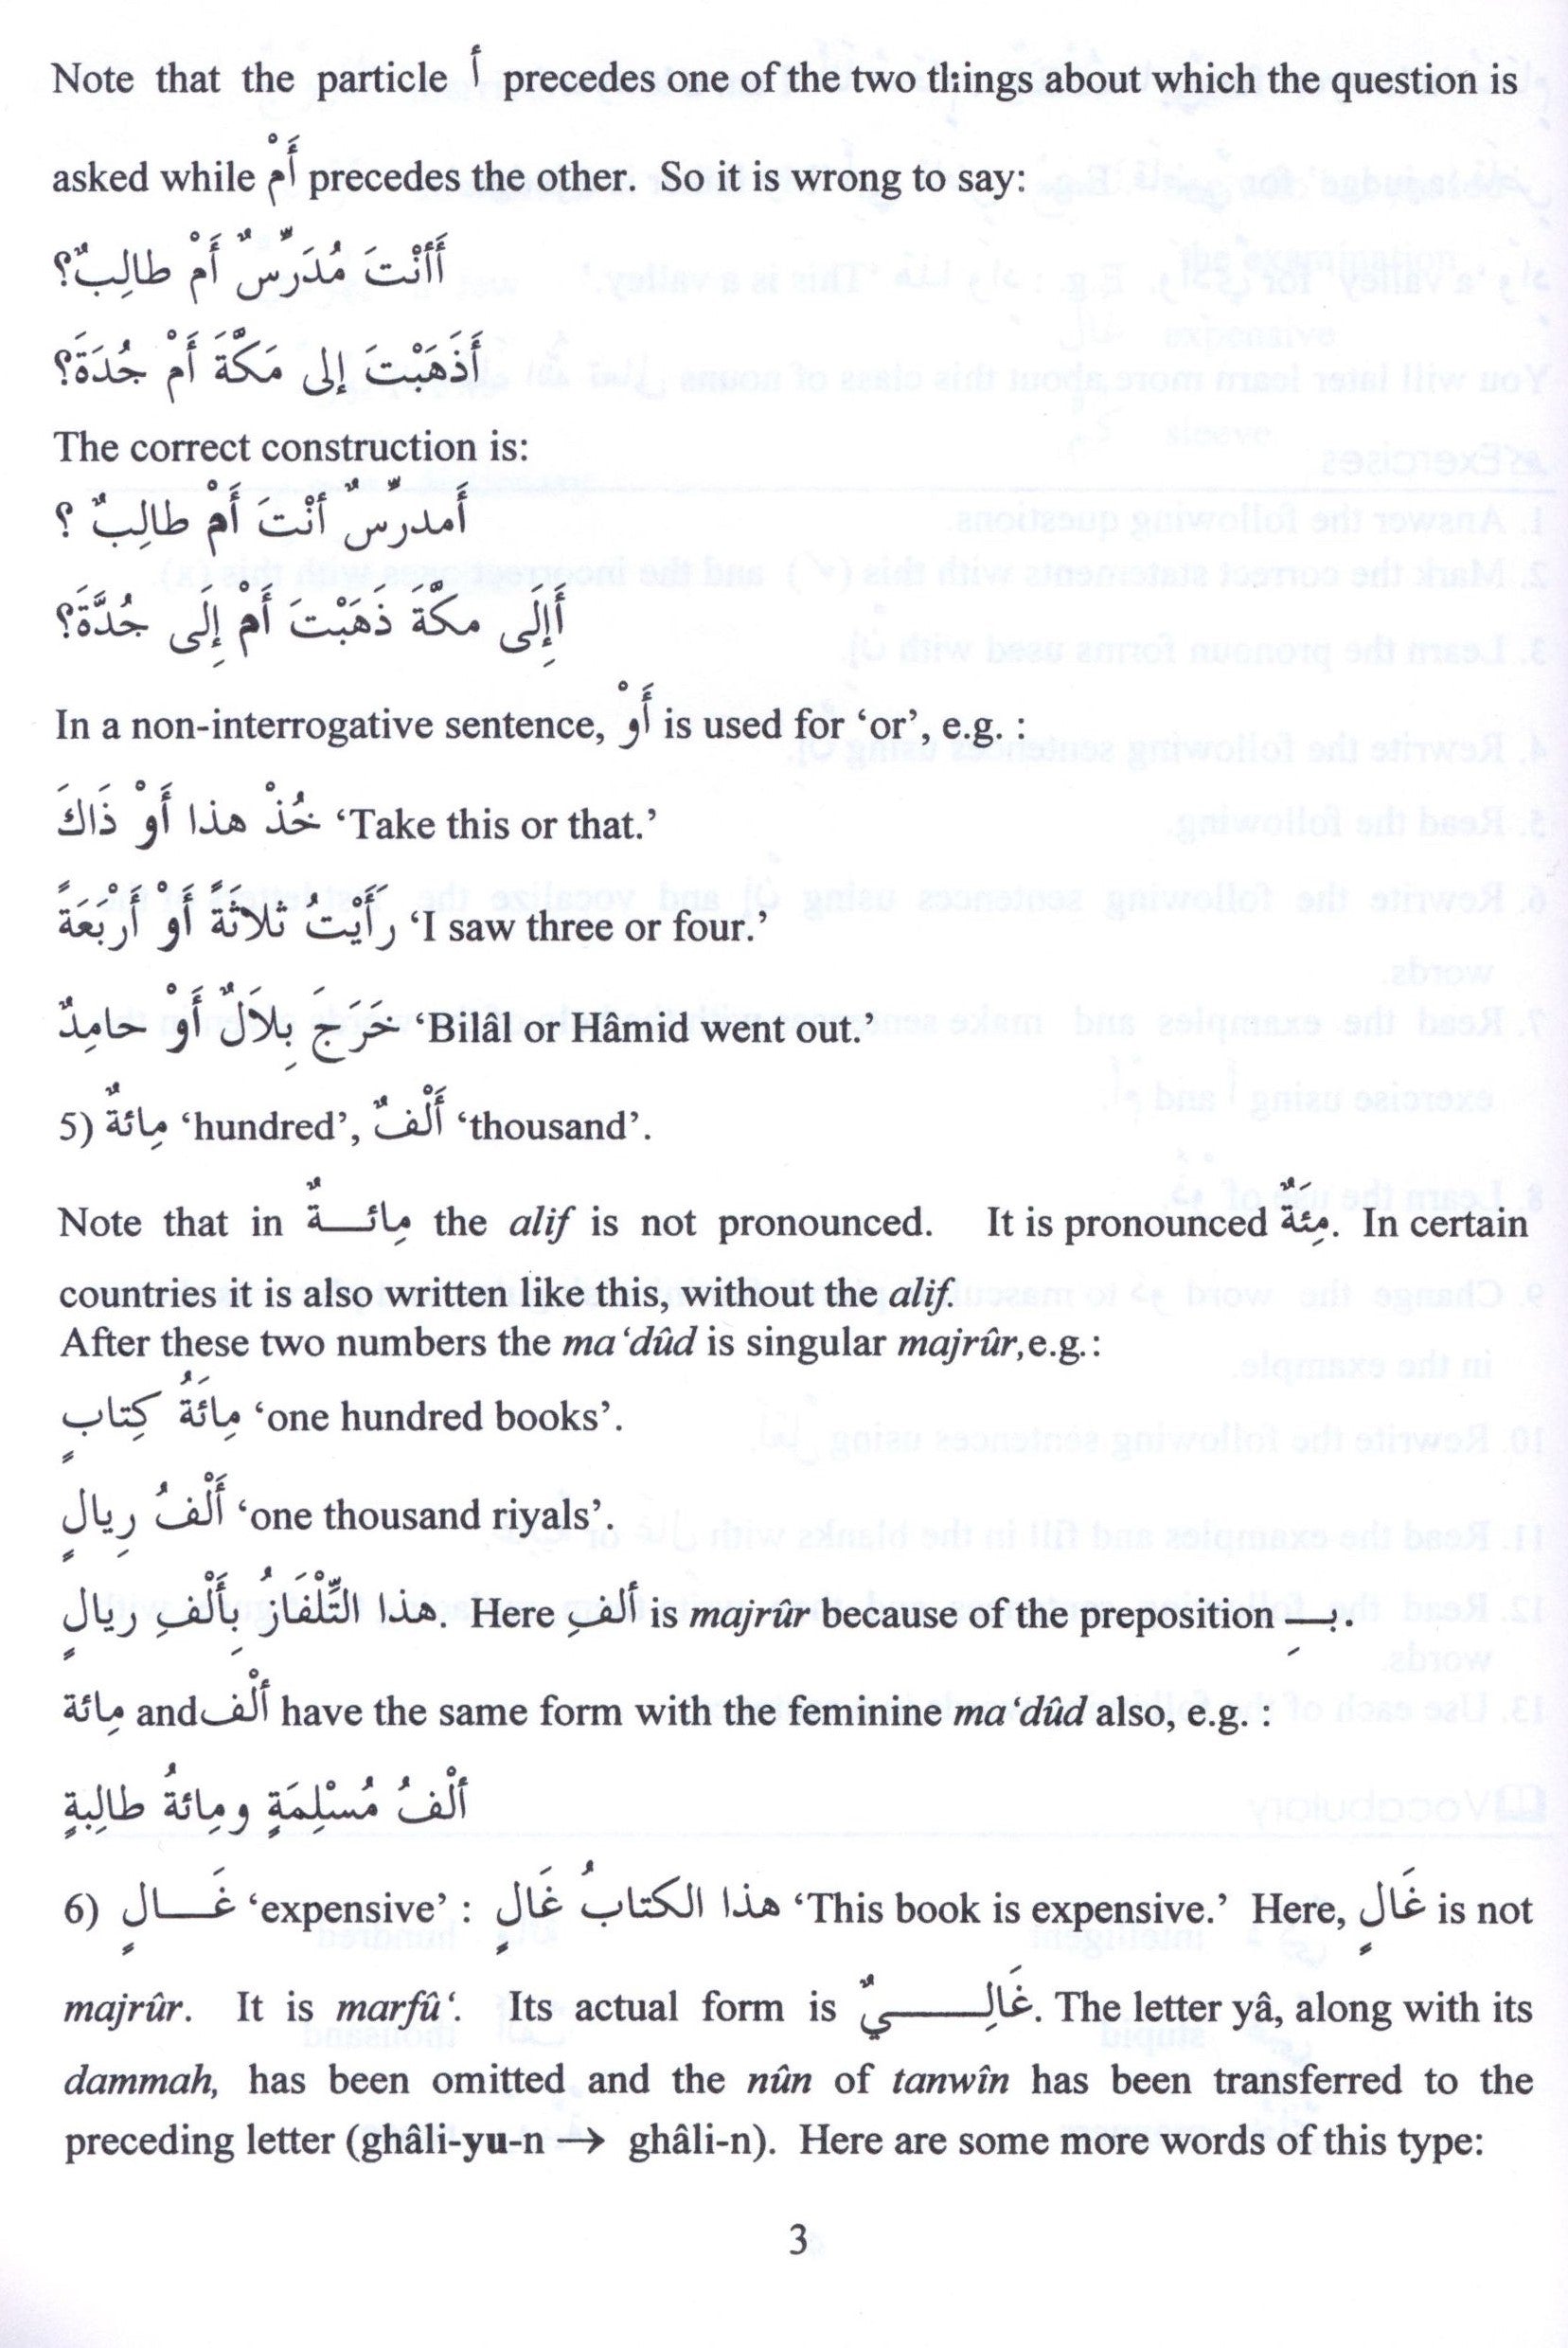 Arabic Course for English Speaking Students Volume 2